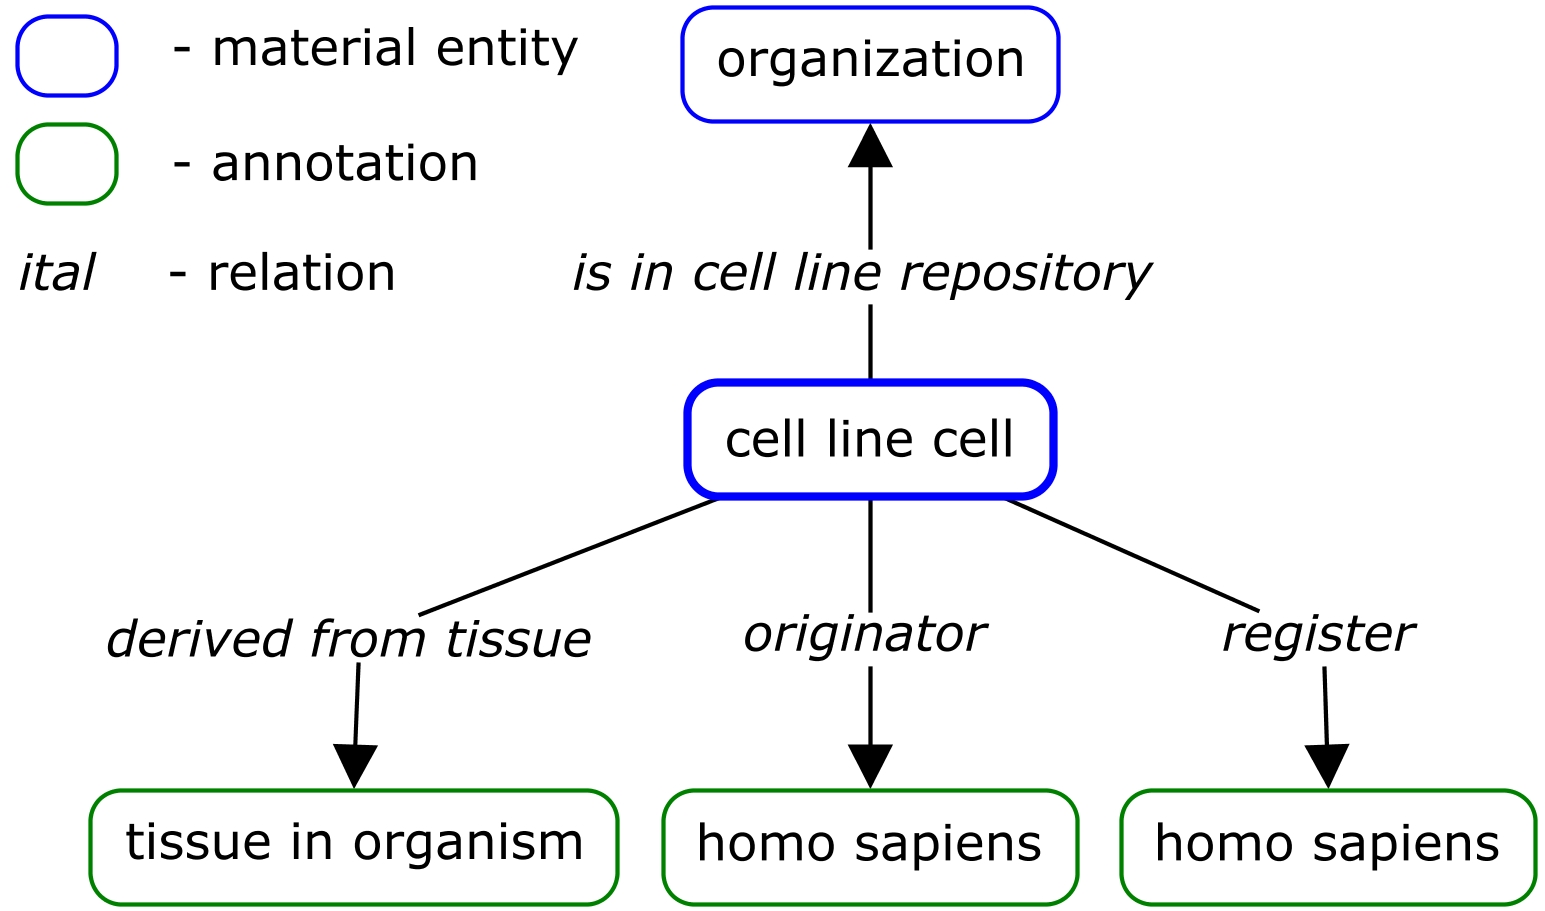 cell line cell ODP